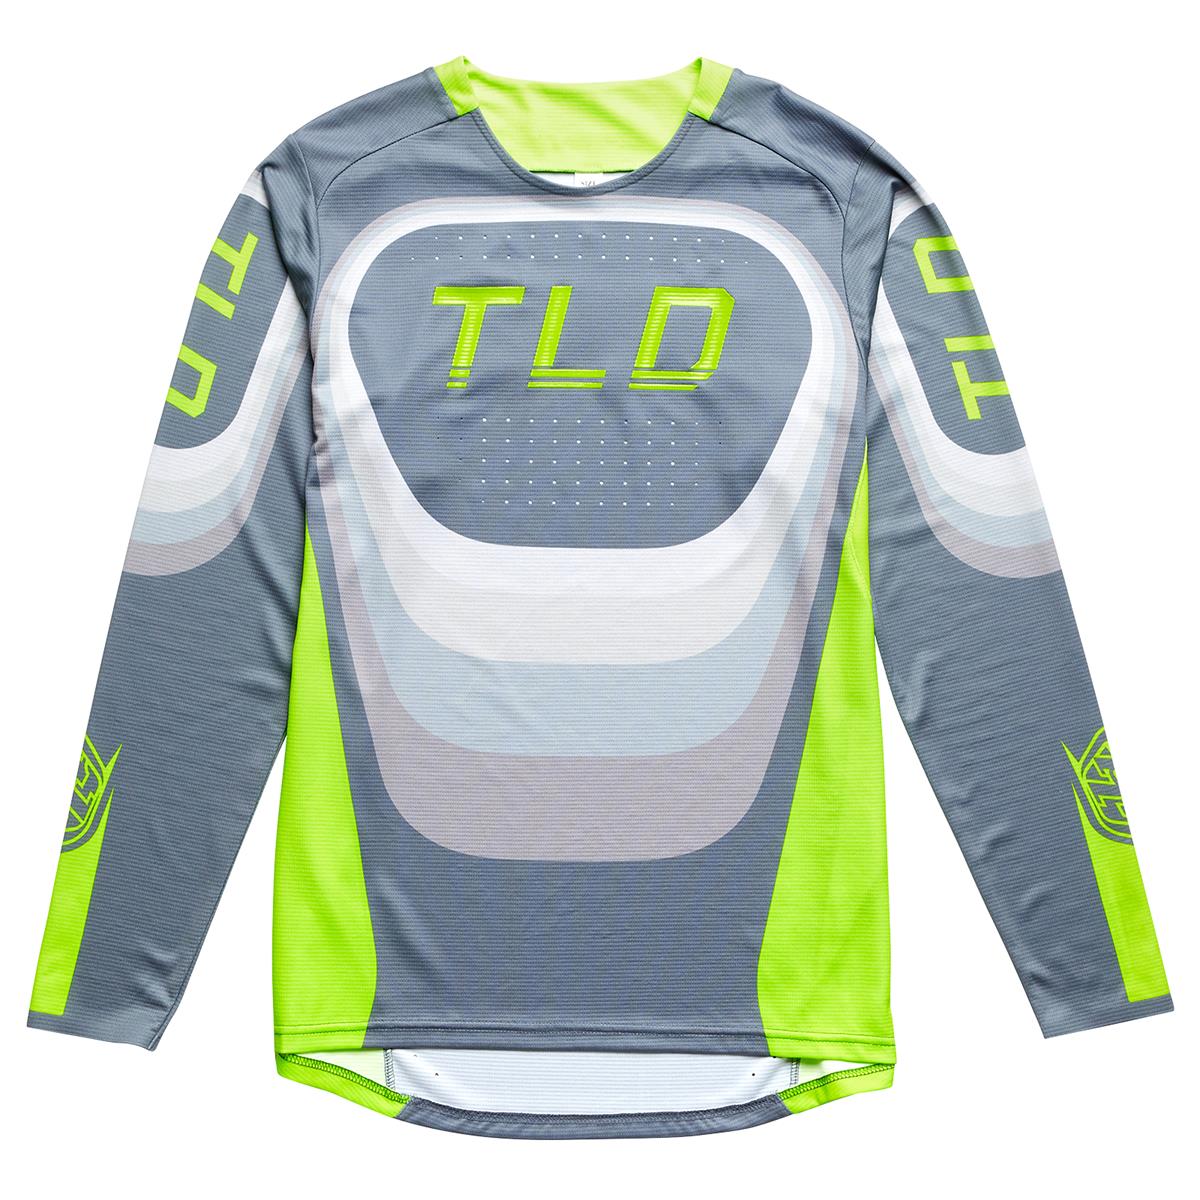 Troy Lee Designs Maillot VTT manches longues Sprint Reverb - Charcoal